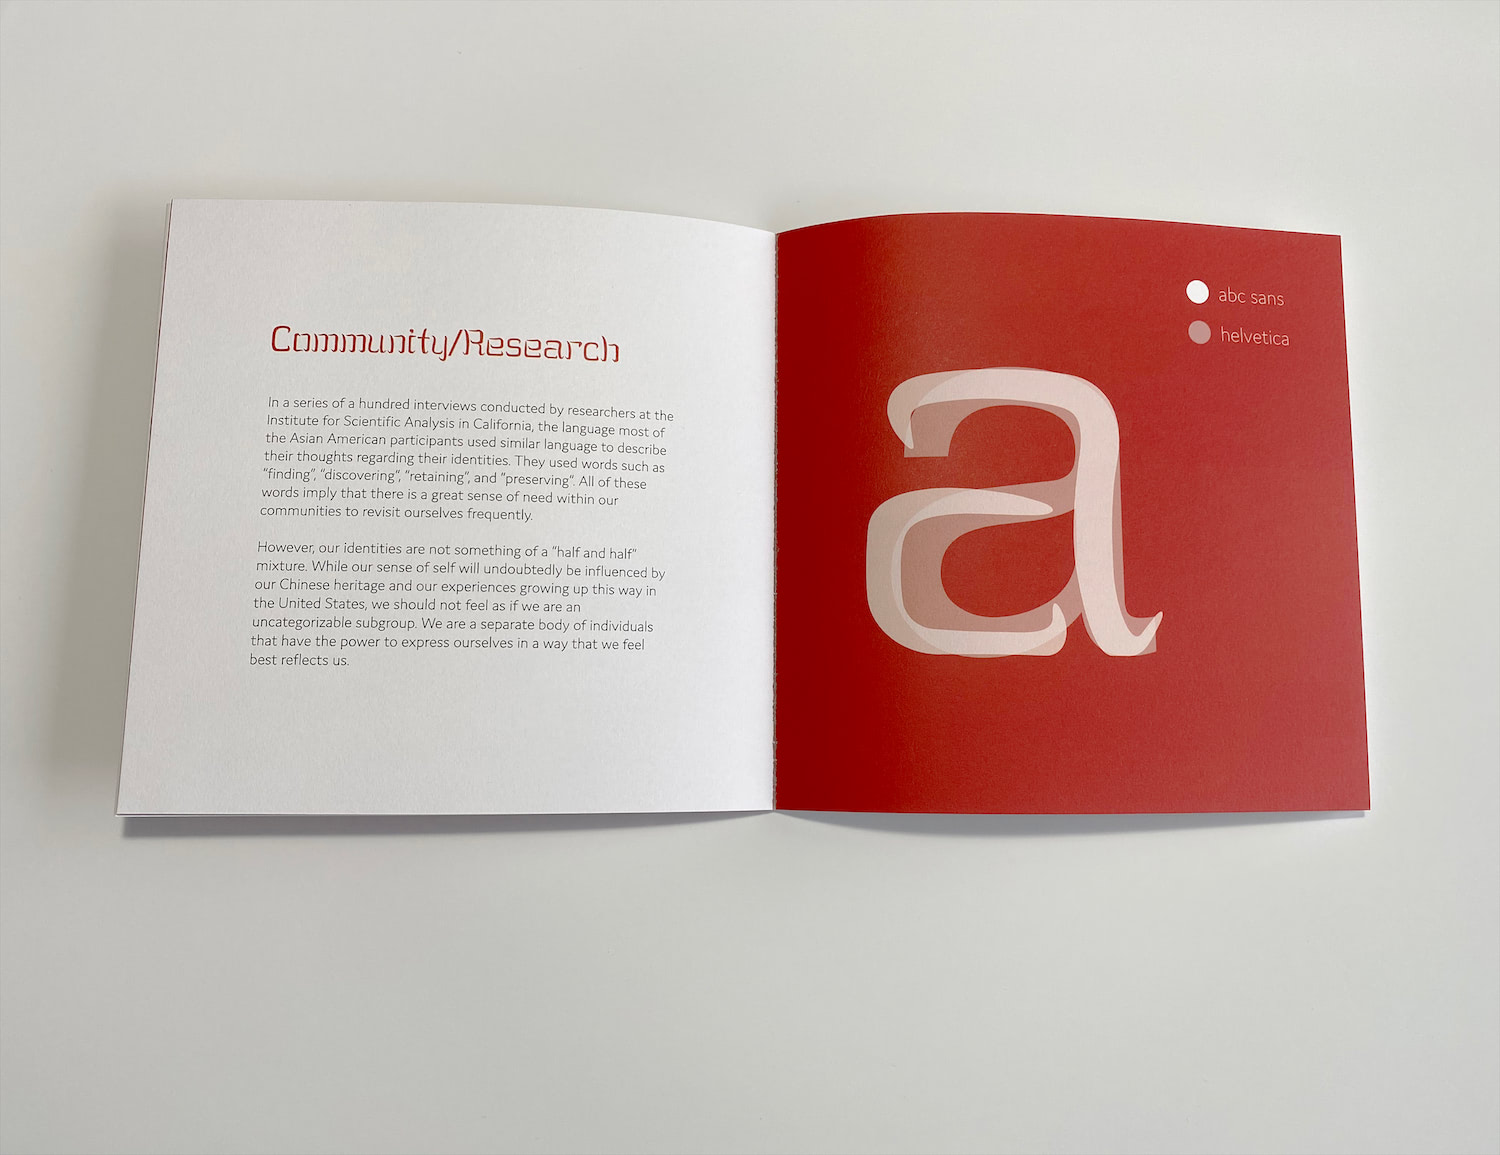 The style guide is open to a spread. The left page contains the chapter, 